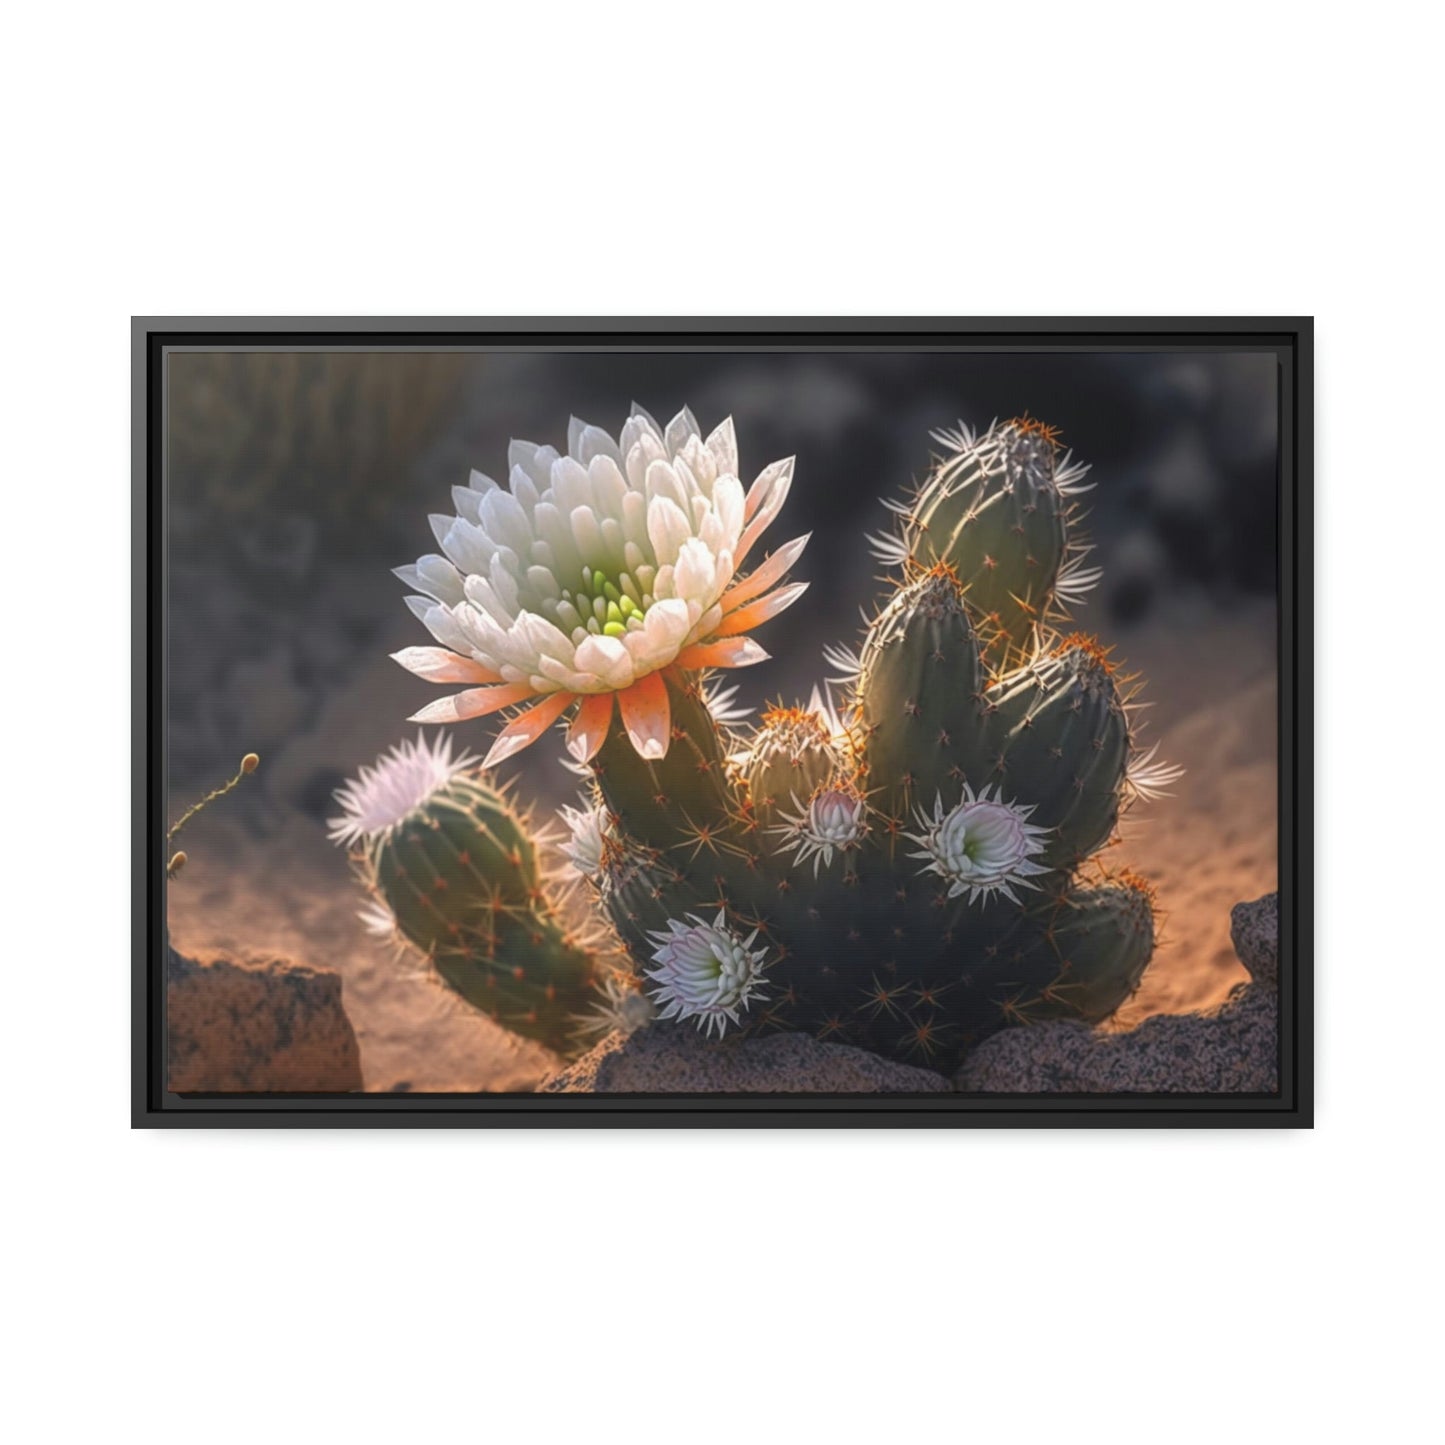 Cactus Wonderland: Canvas Print for a Whimsical and Playful Wall Decor